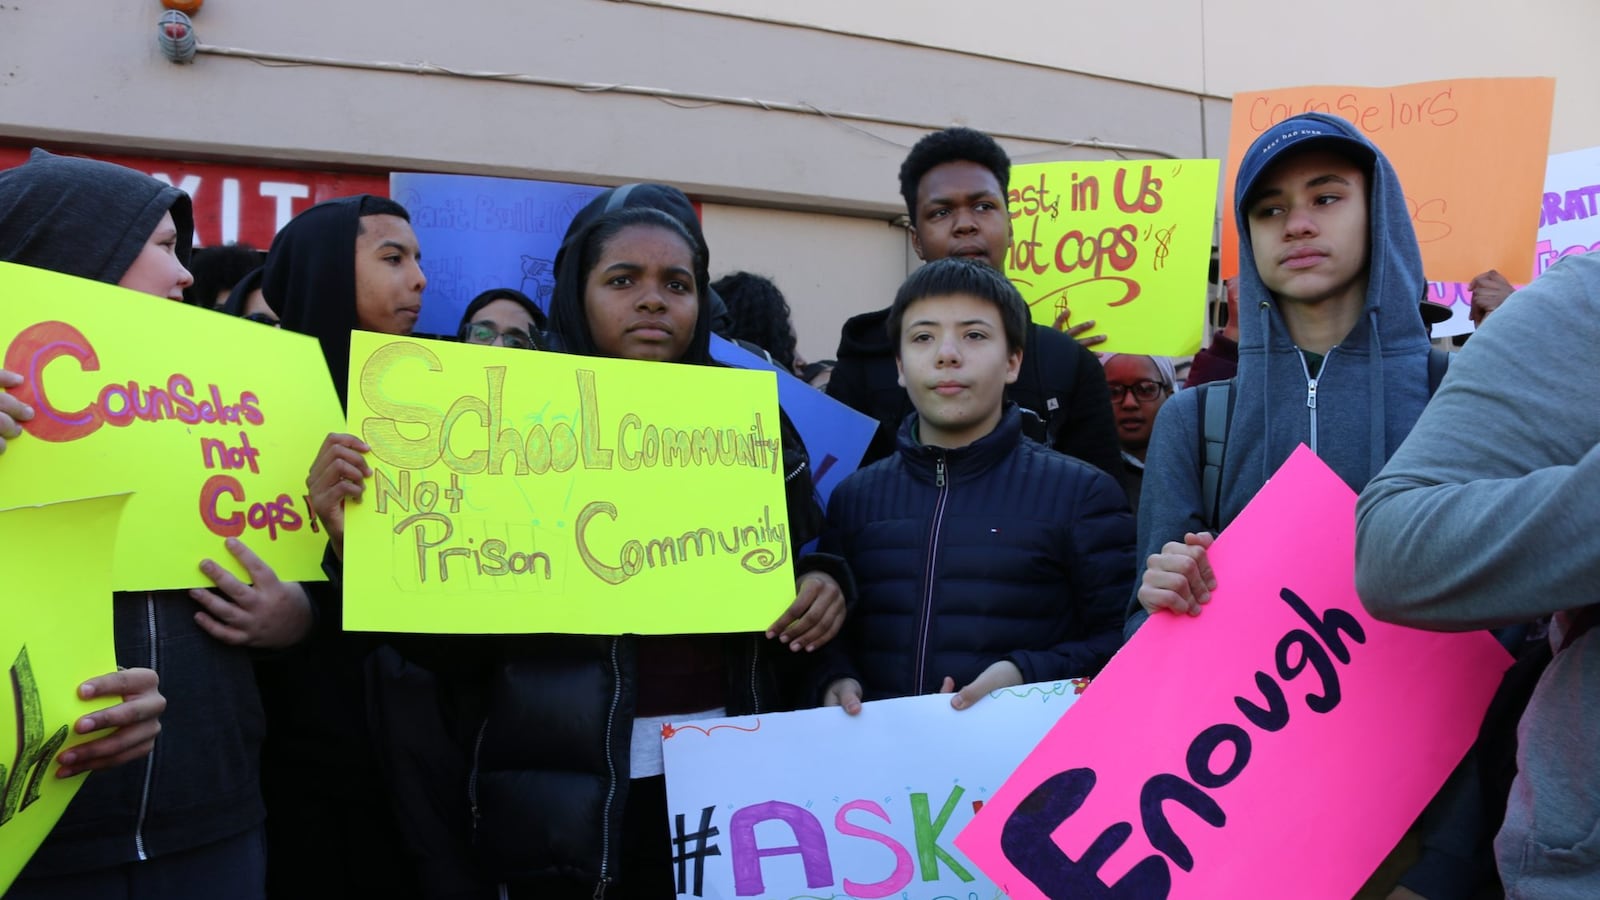 Students from the Grace Dodge campus in the Bronx walked out of class on March 14, 2018, to call for more investment in mental health support and counselors.